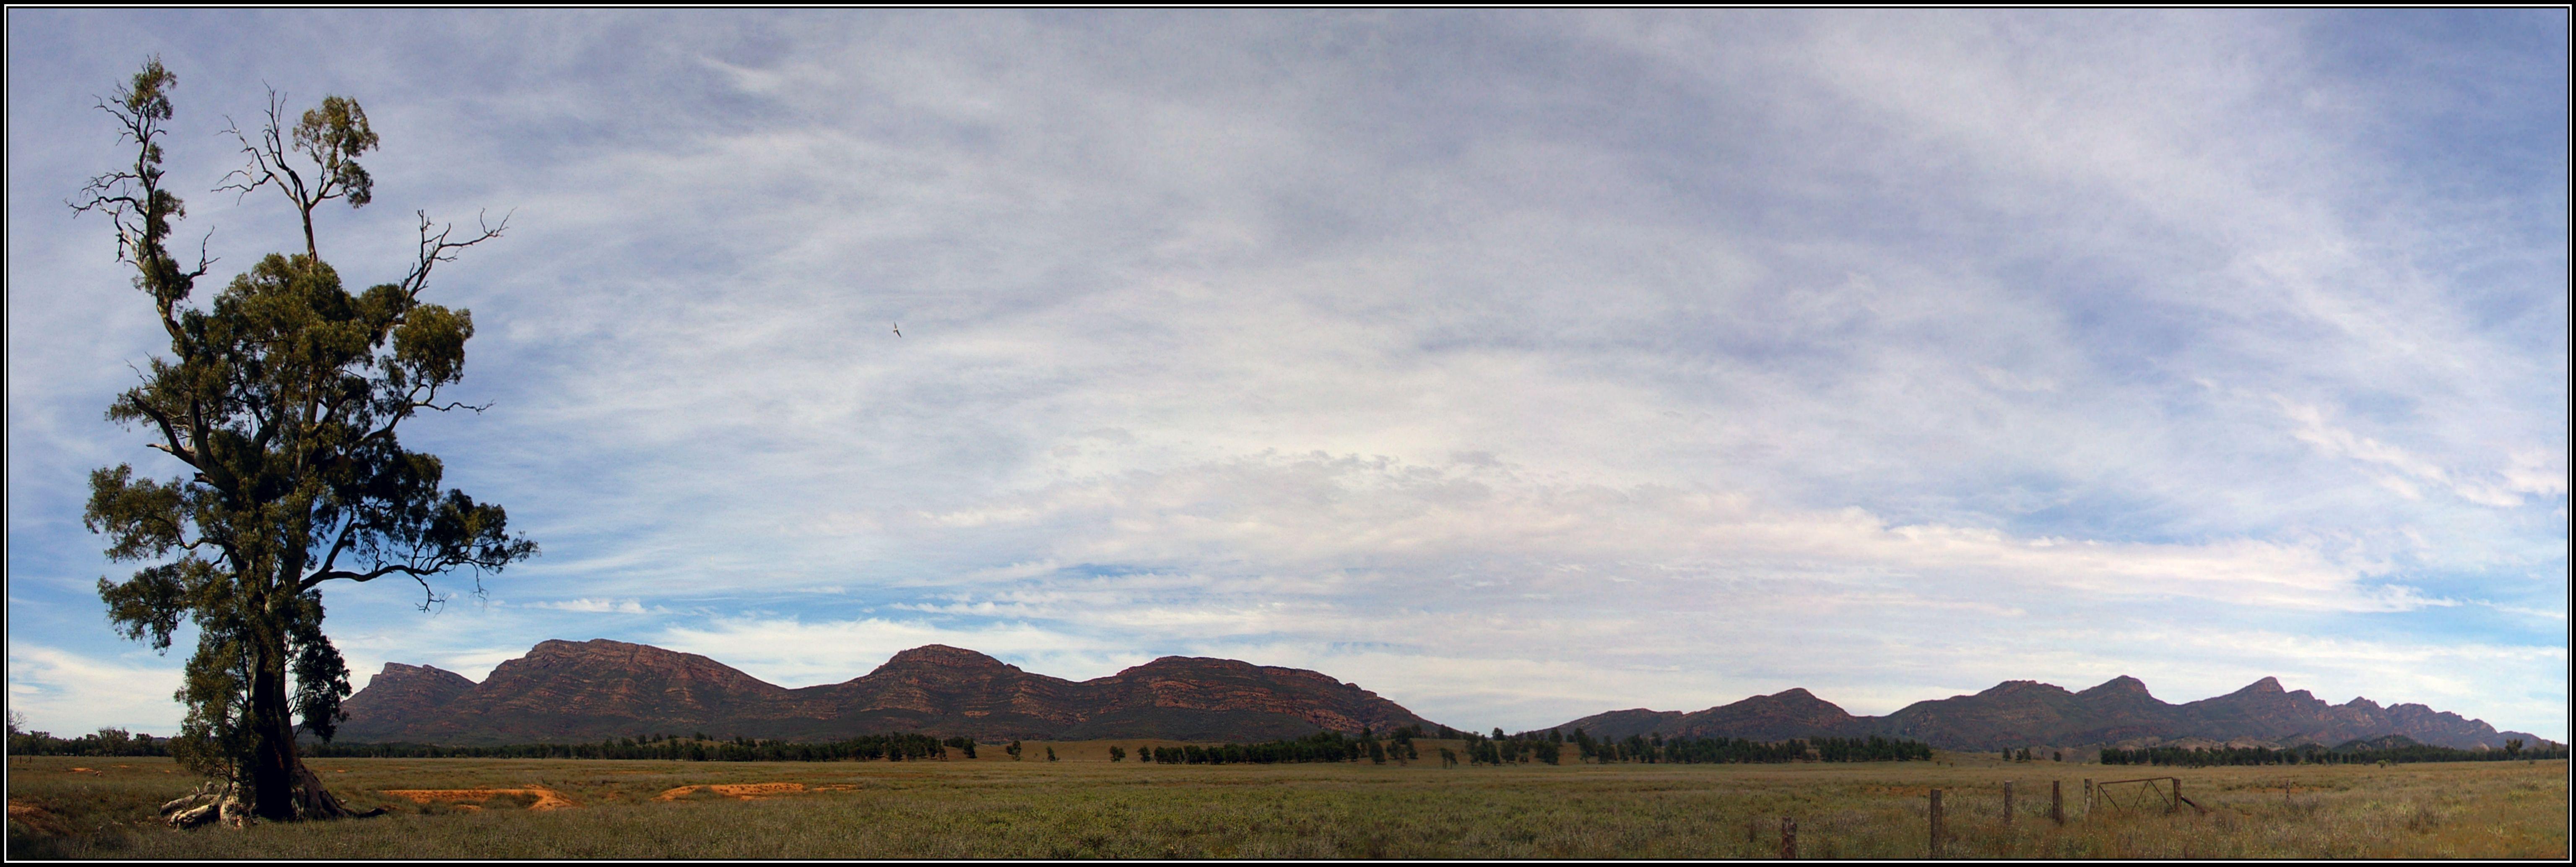 Panorama showing the Cazneaux Tree, with Wilpena Pound in